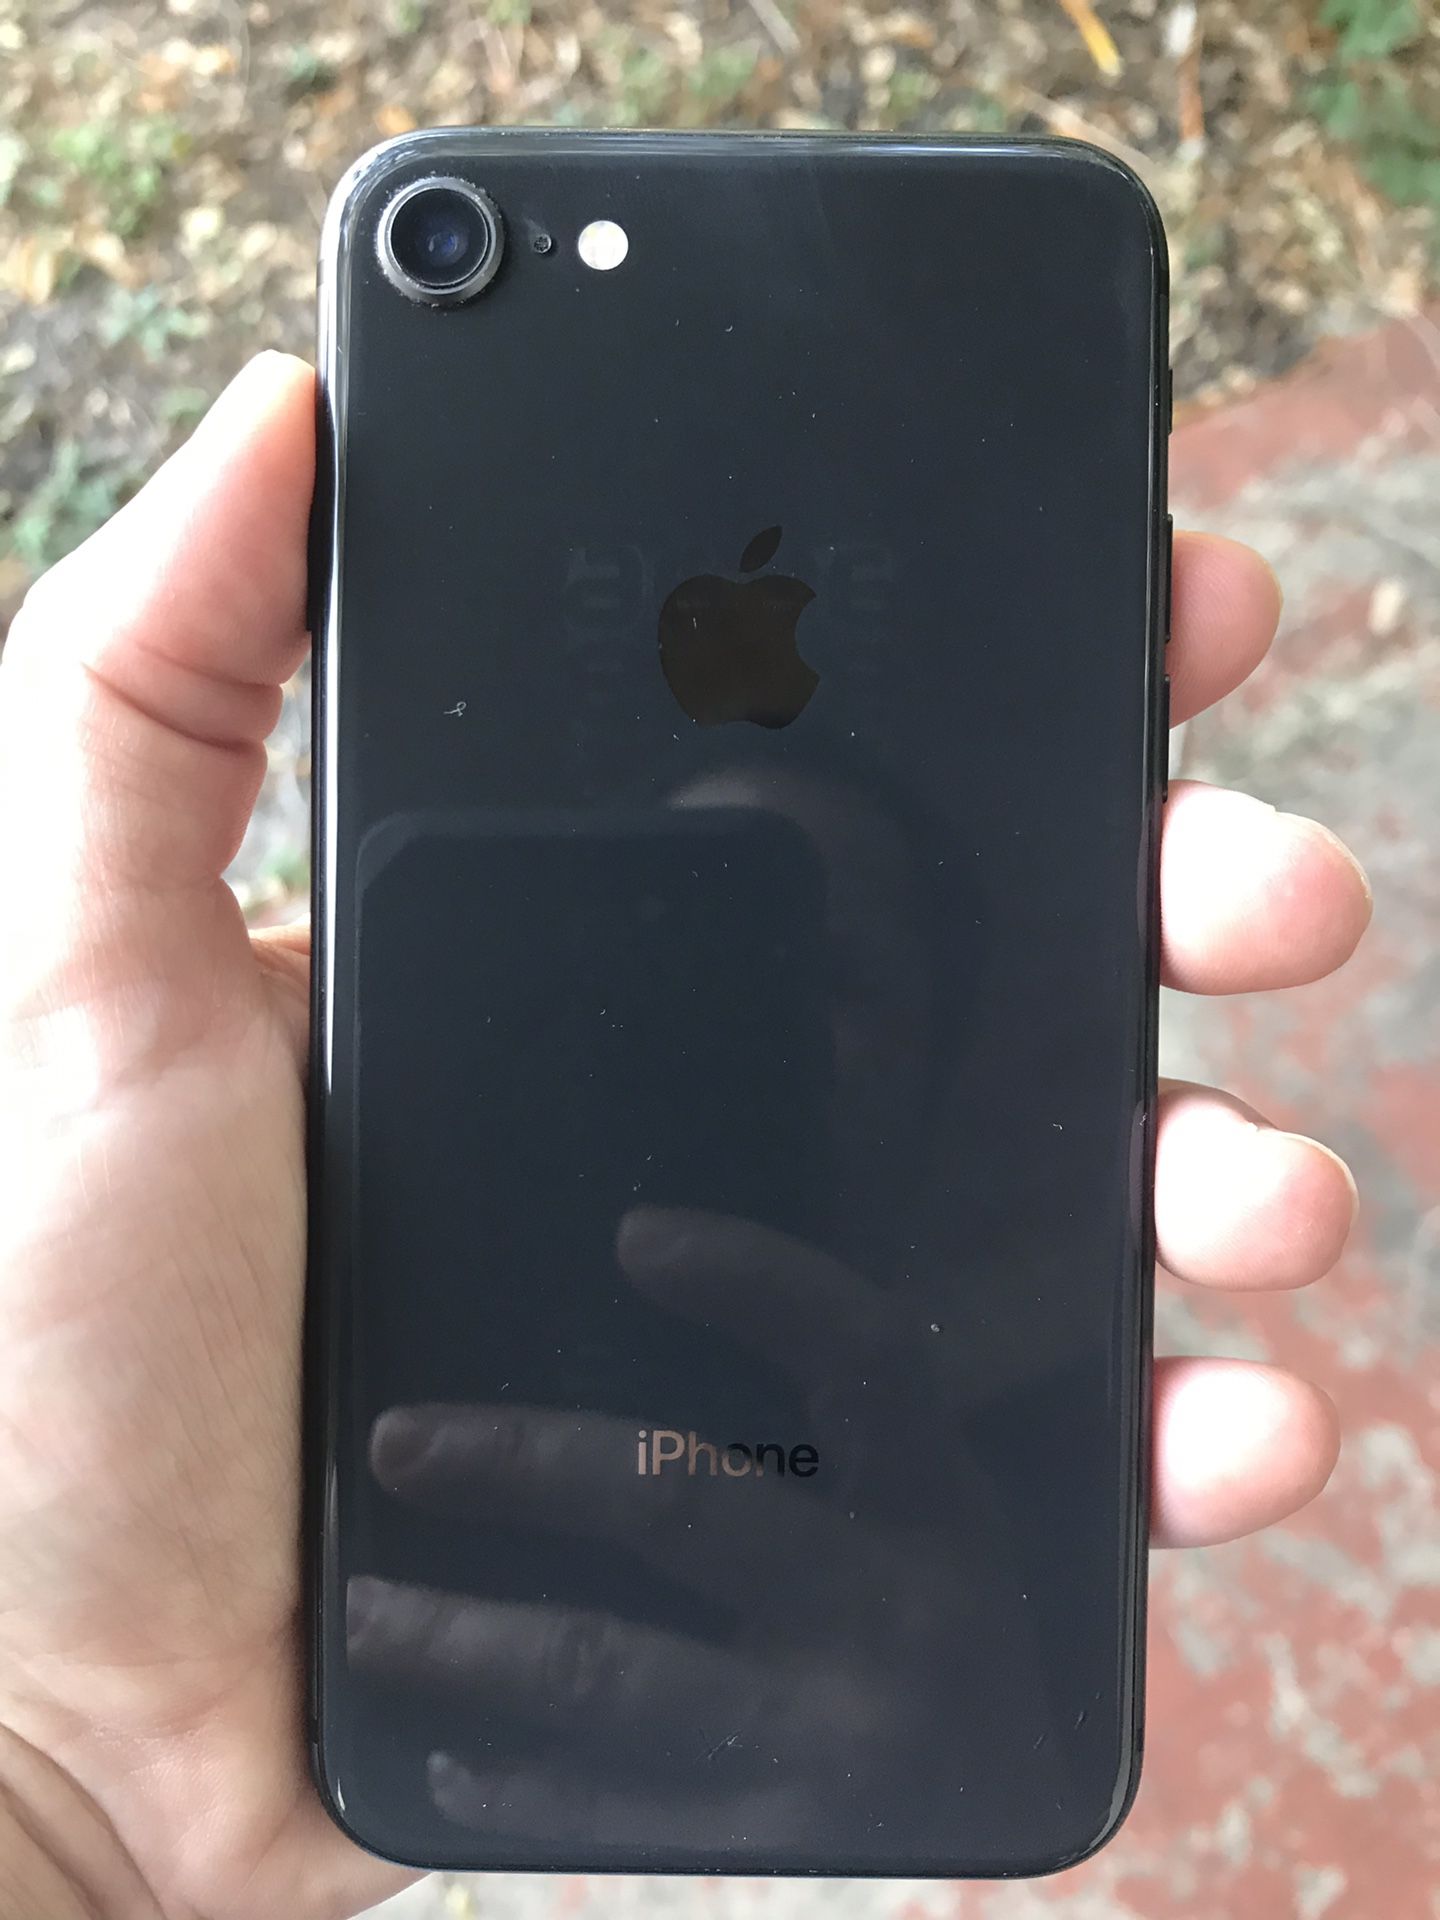 iPhone 8 64GB Factory Unlocked GSM & CDMA Worldwide (Fully Functional, Clean IMEI And ICloud is Clear, Trusted IPhone Dealer)